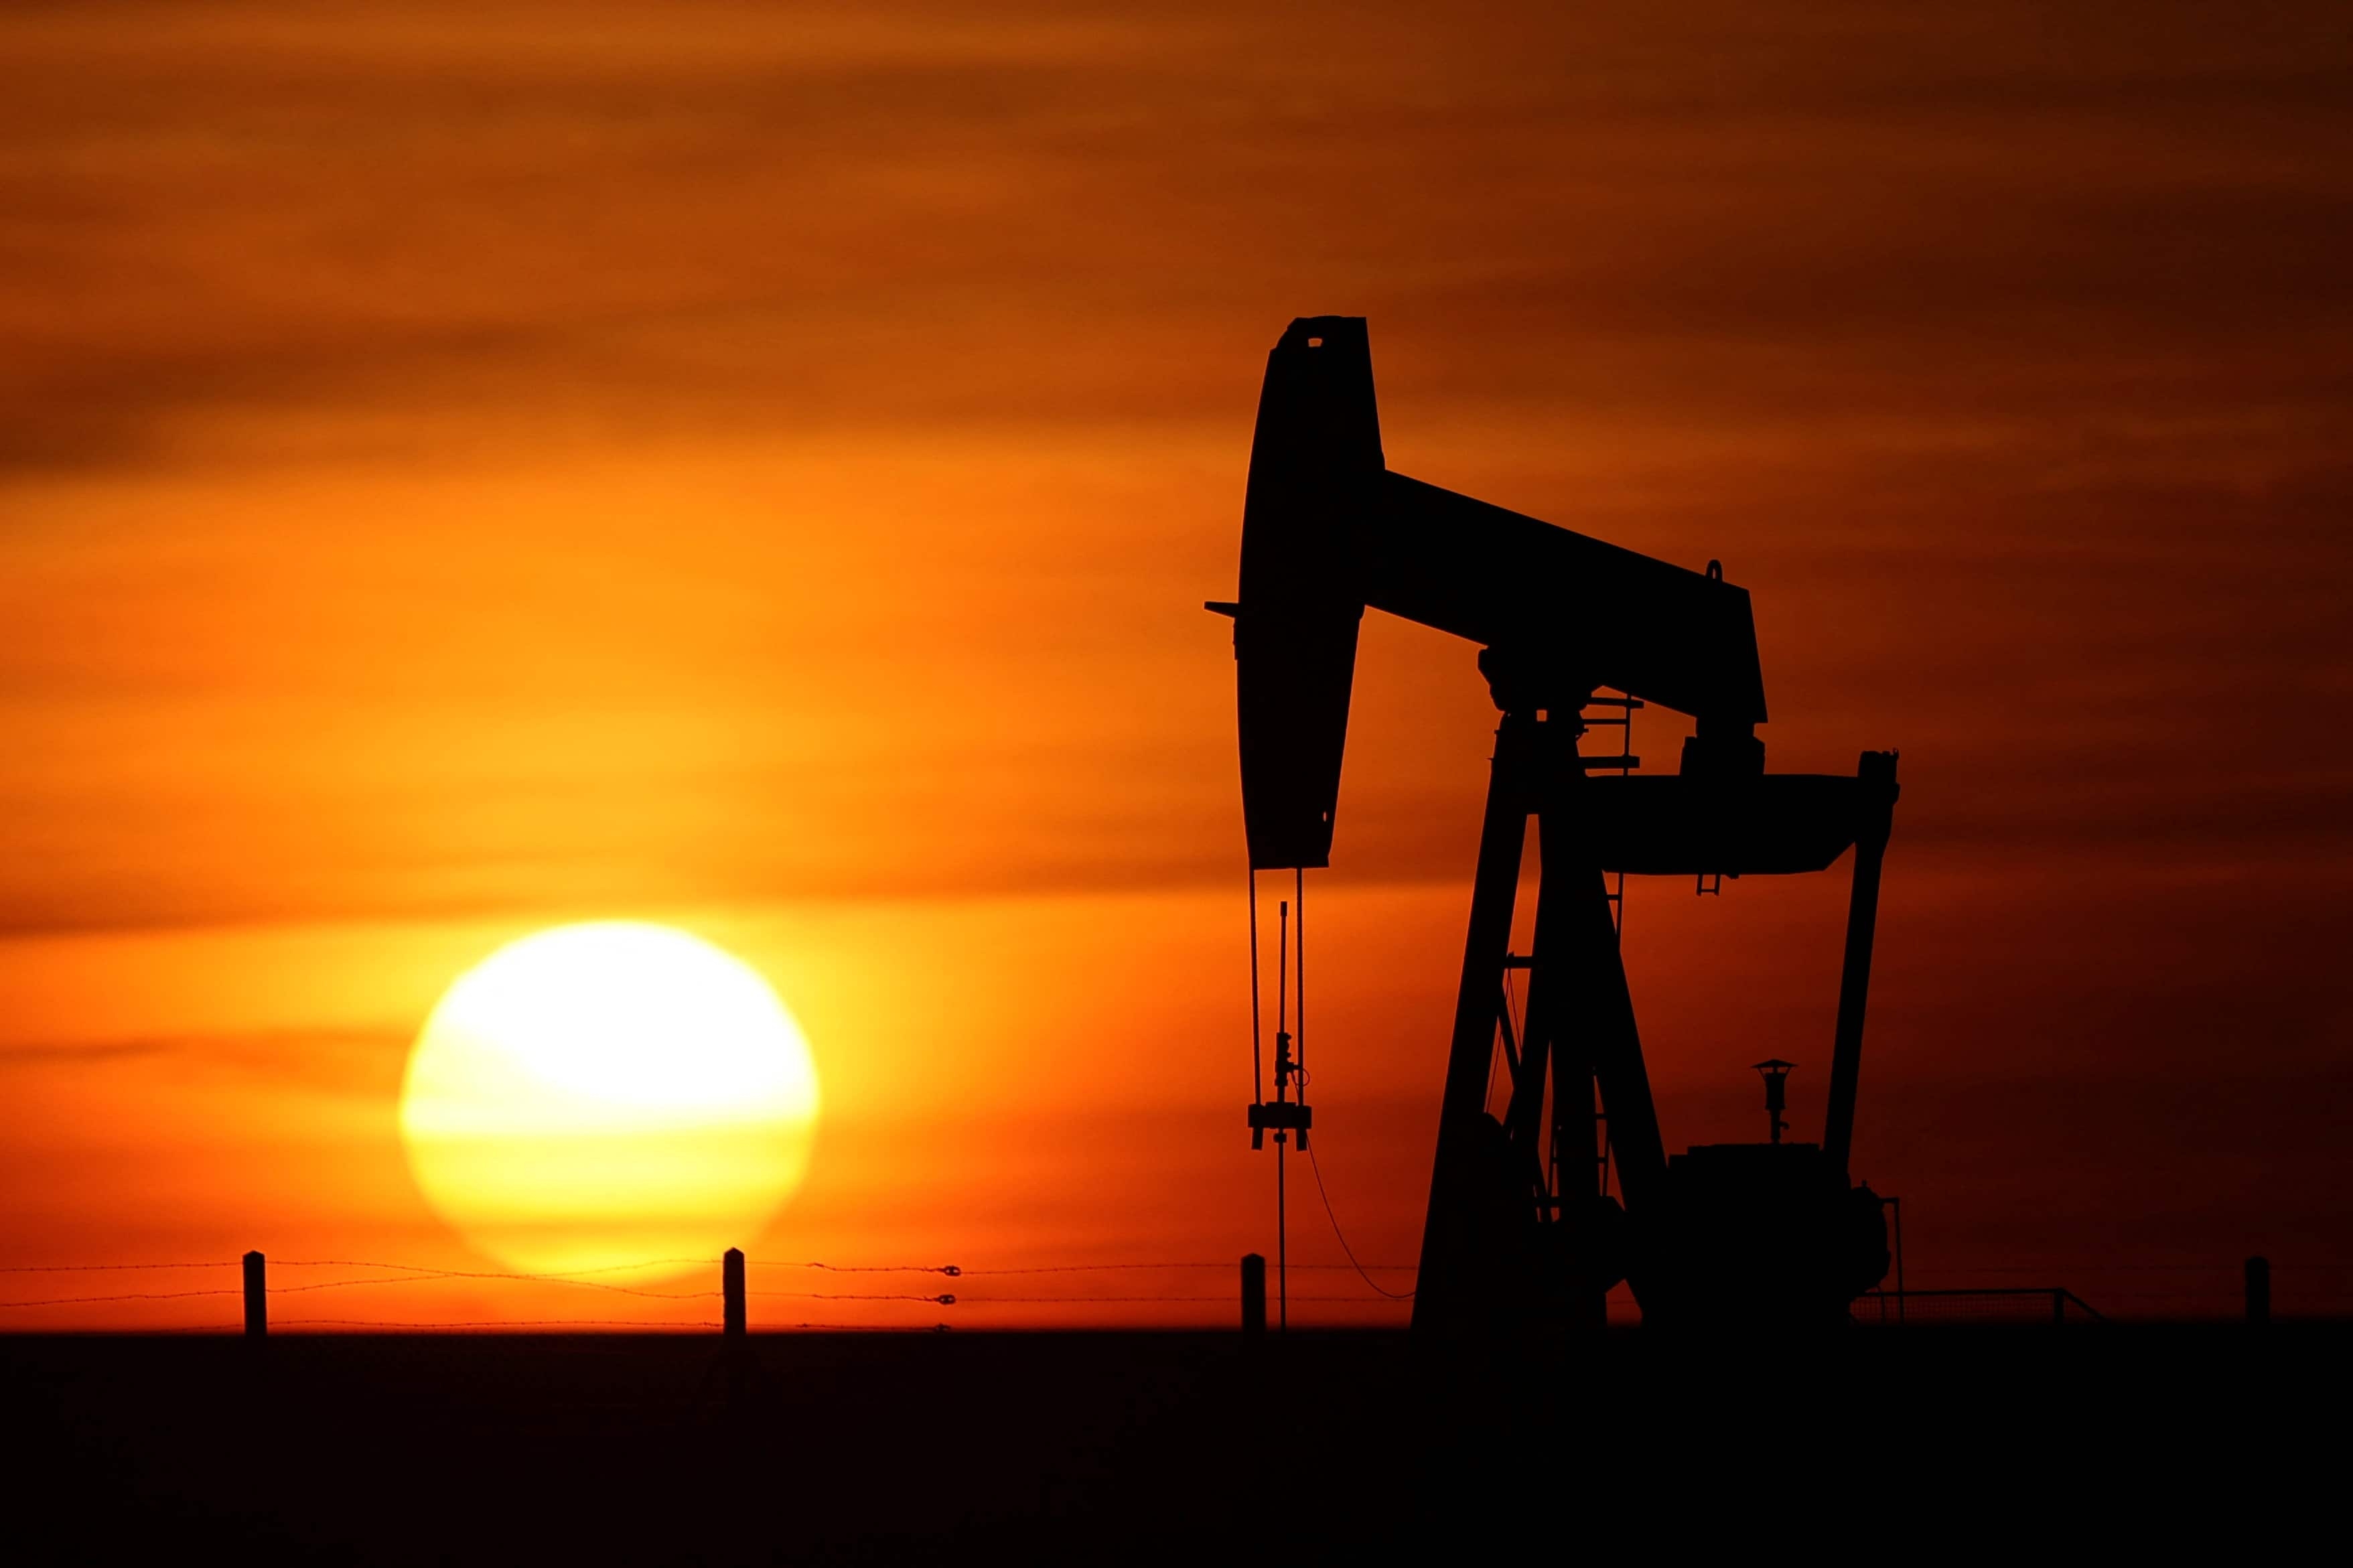 Oil declined as the week’s trading kicked off as investors weighed a pledge by the Group of Seven to ban imports of Russian crude against a cut in official prices by Saudi Arabia and China’s lockdowns. West Texas Intermediate fell toward $109 a barrel after closing at a six-week high on Friday.